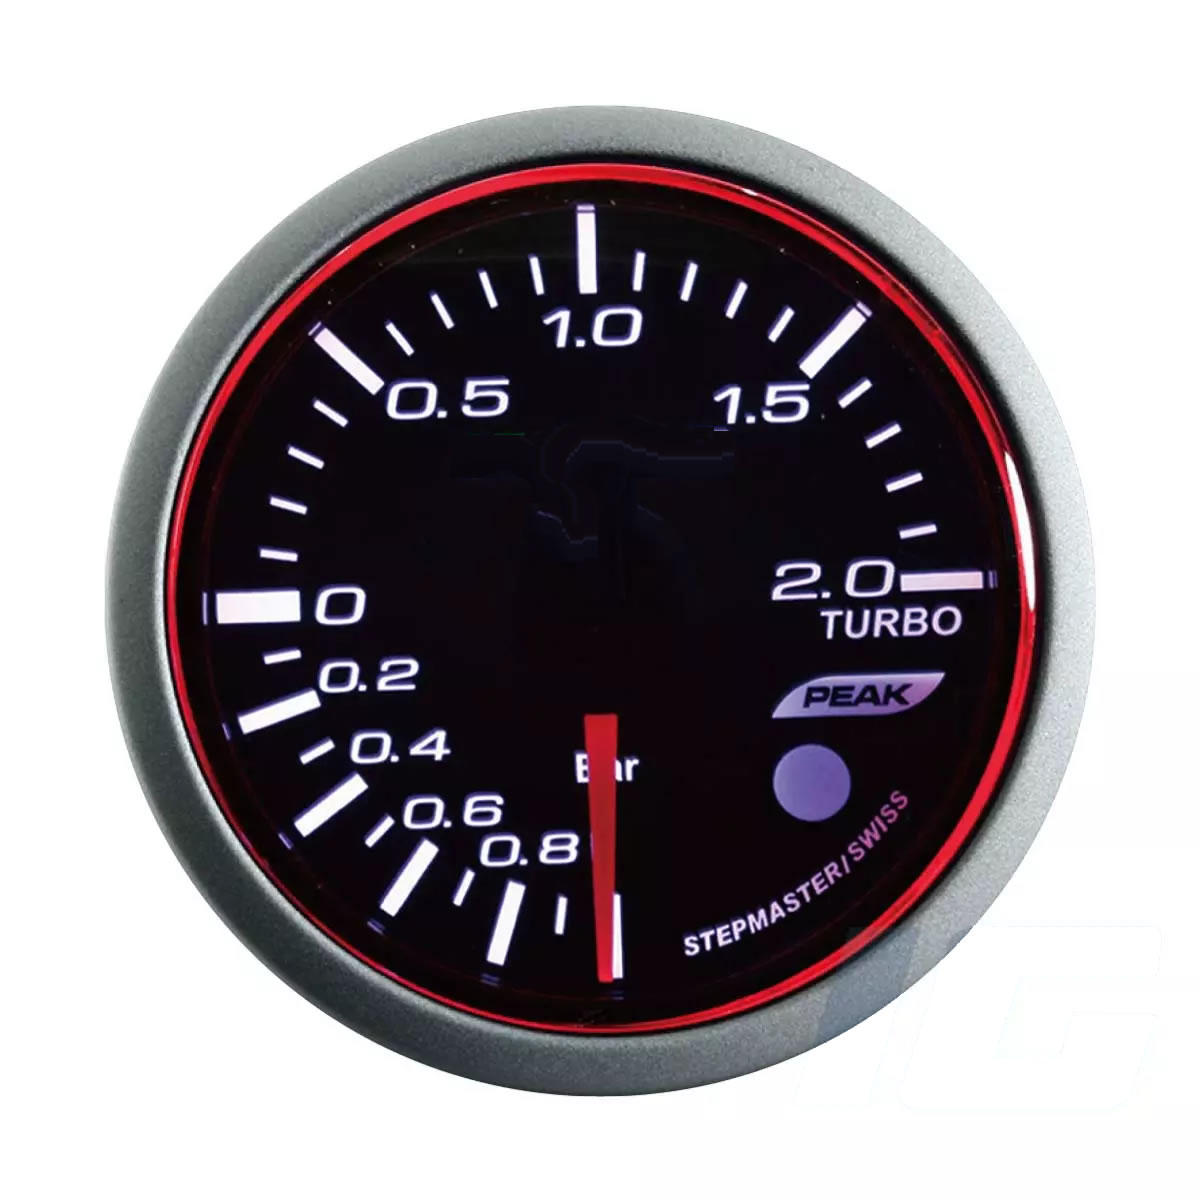 Performance Car Gauges - Boost Gauge With Sensor and Warning and Peak For Your Sport Racing Car